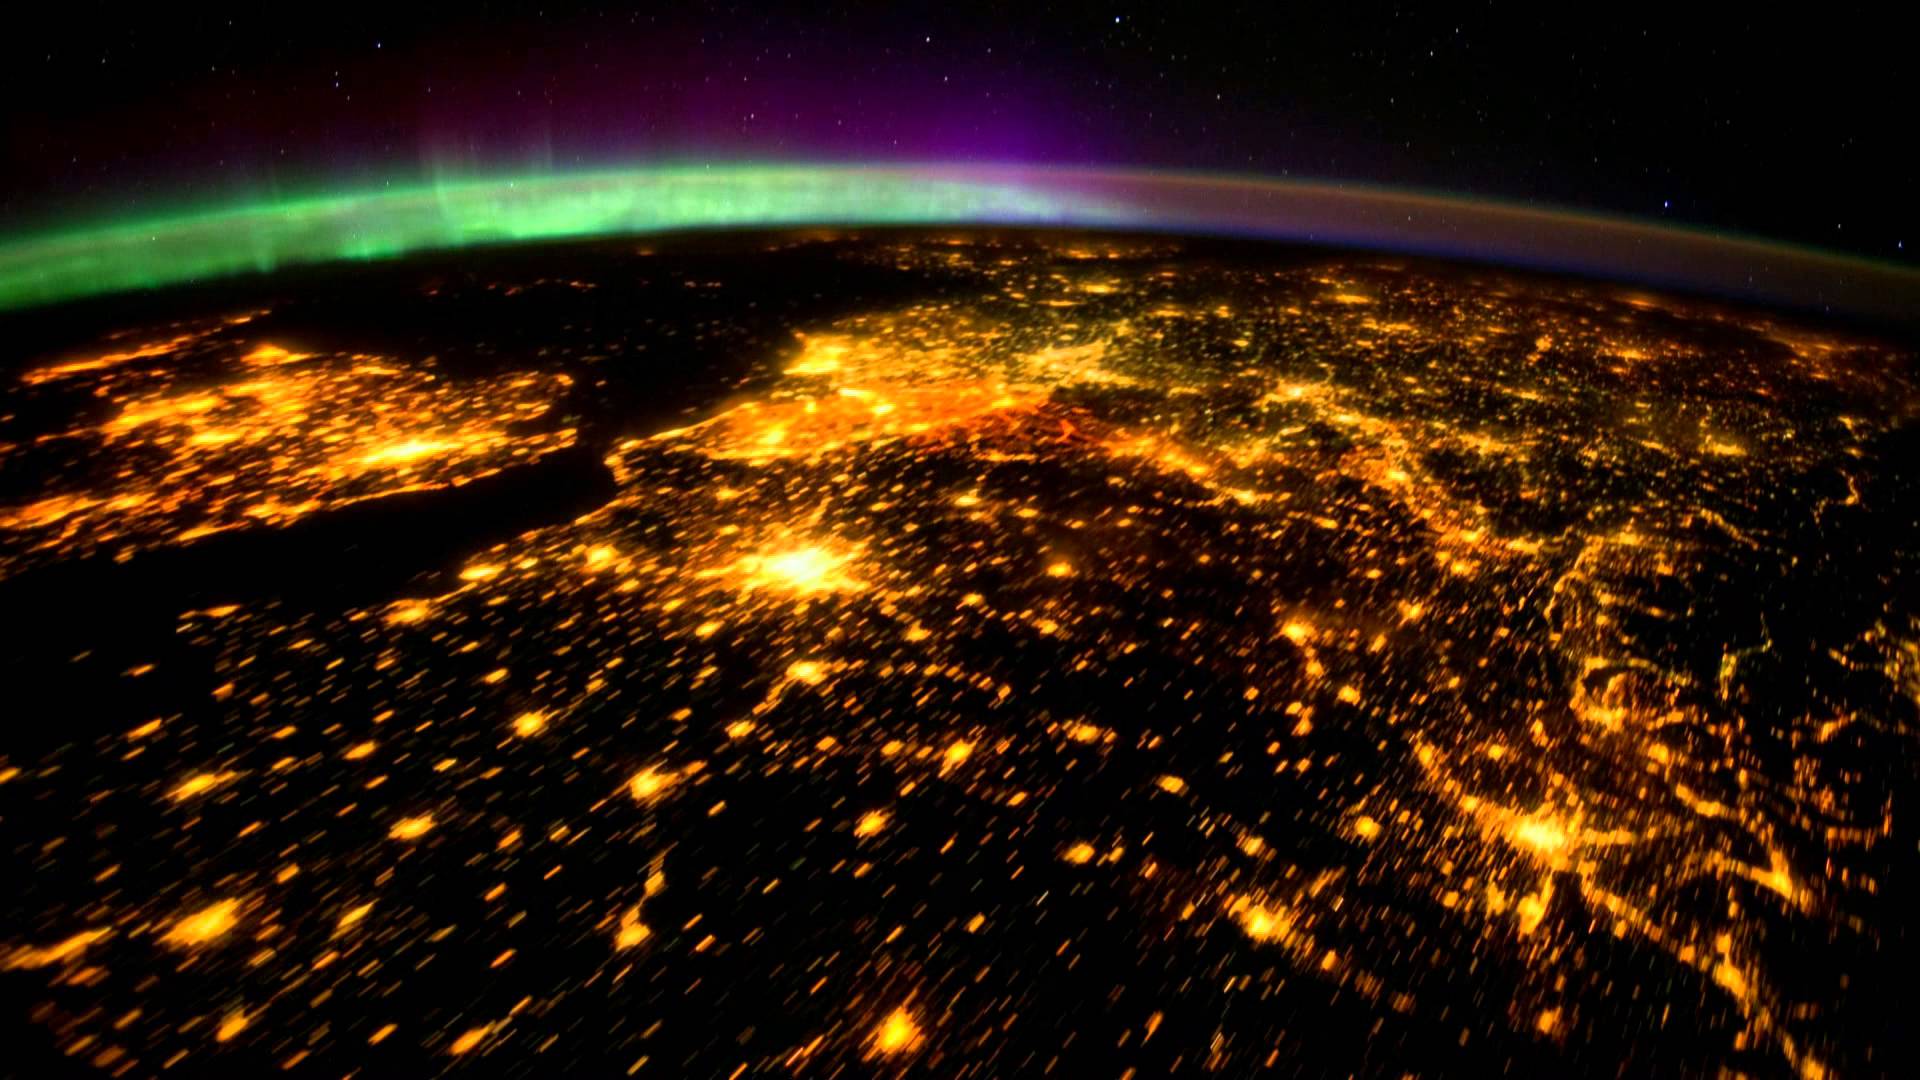 Pla Earth Seen From Space Iss Mainly At Night With Aurora